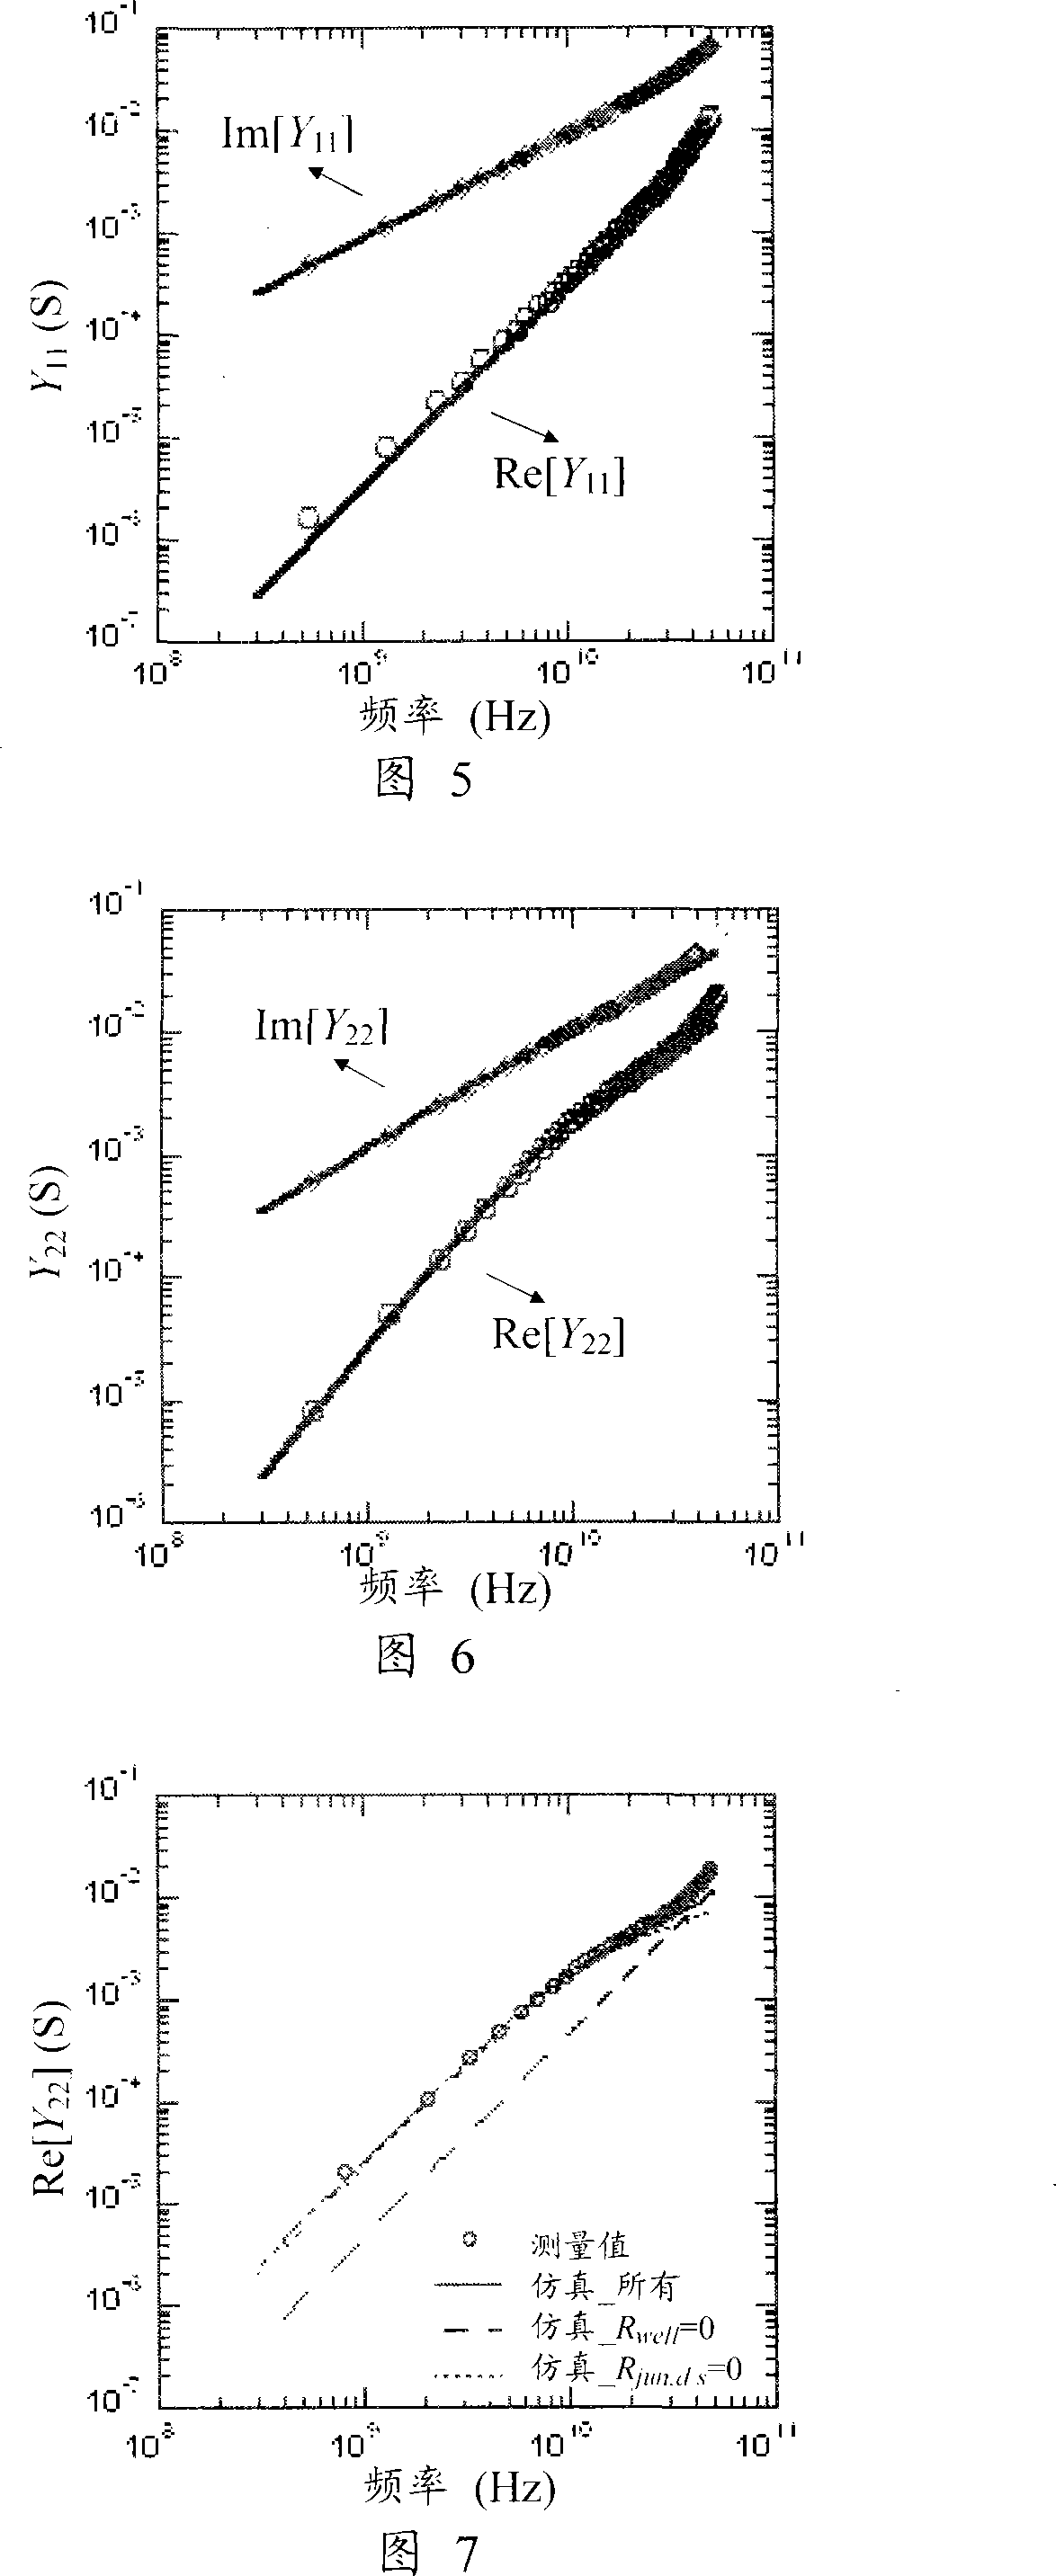 MOS transistor radio frequency circuit simulated macro model and its parameter extraction method